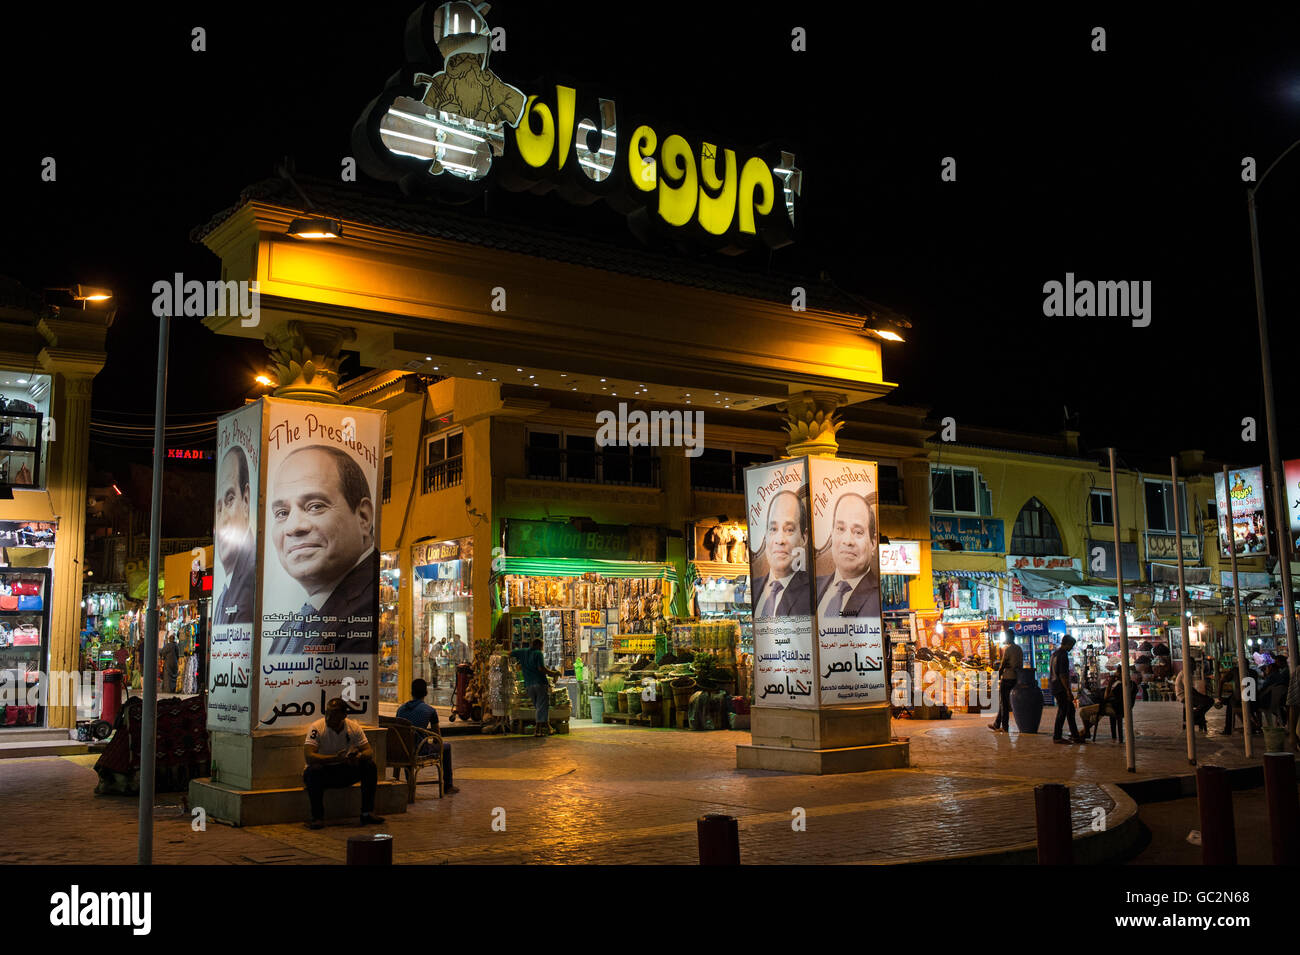 El-Sisi egyptian military dictator portait on the wall of Old Sharm el Sheikh, Egypt Stock Photo